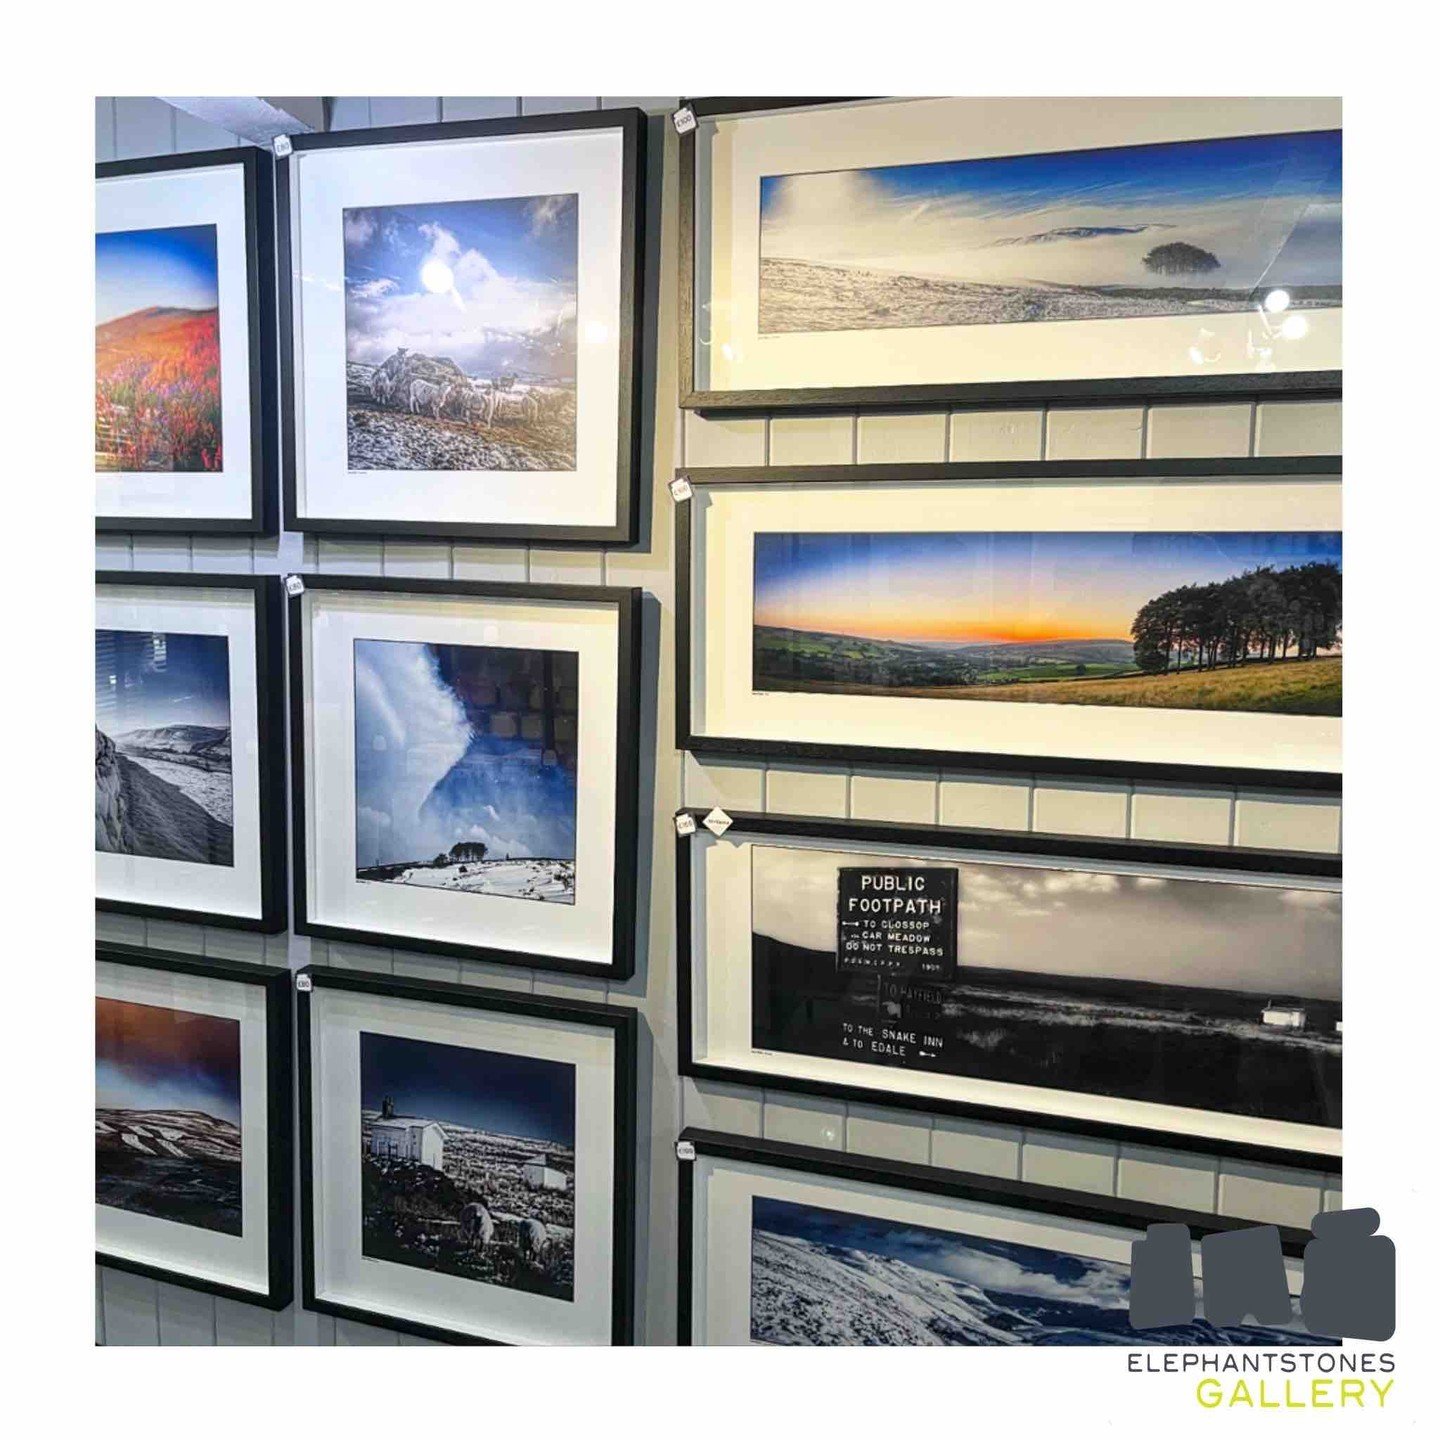 Elephantstones photographer Simon&rsquo;s wall at the gallery is bursting with gorgeous Hayfield landscapes! ✨🎨 We&rsquo;ve just restocked panoramic prints, so if you&rsquo;ve had your eye on one that&rsquo;s back in stock, why not pop in?
-
If you&